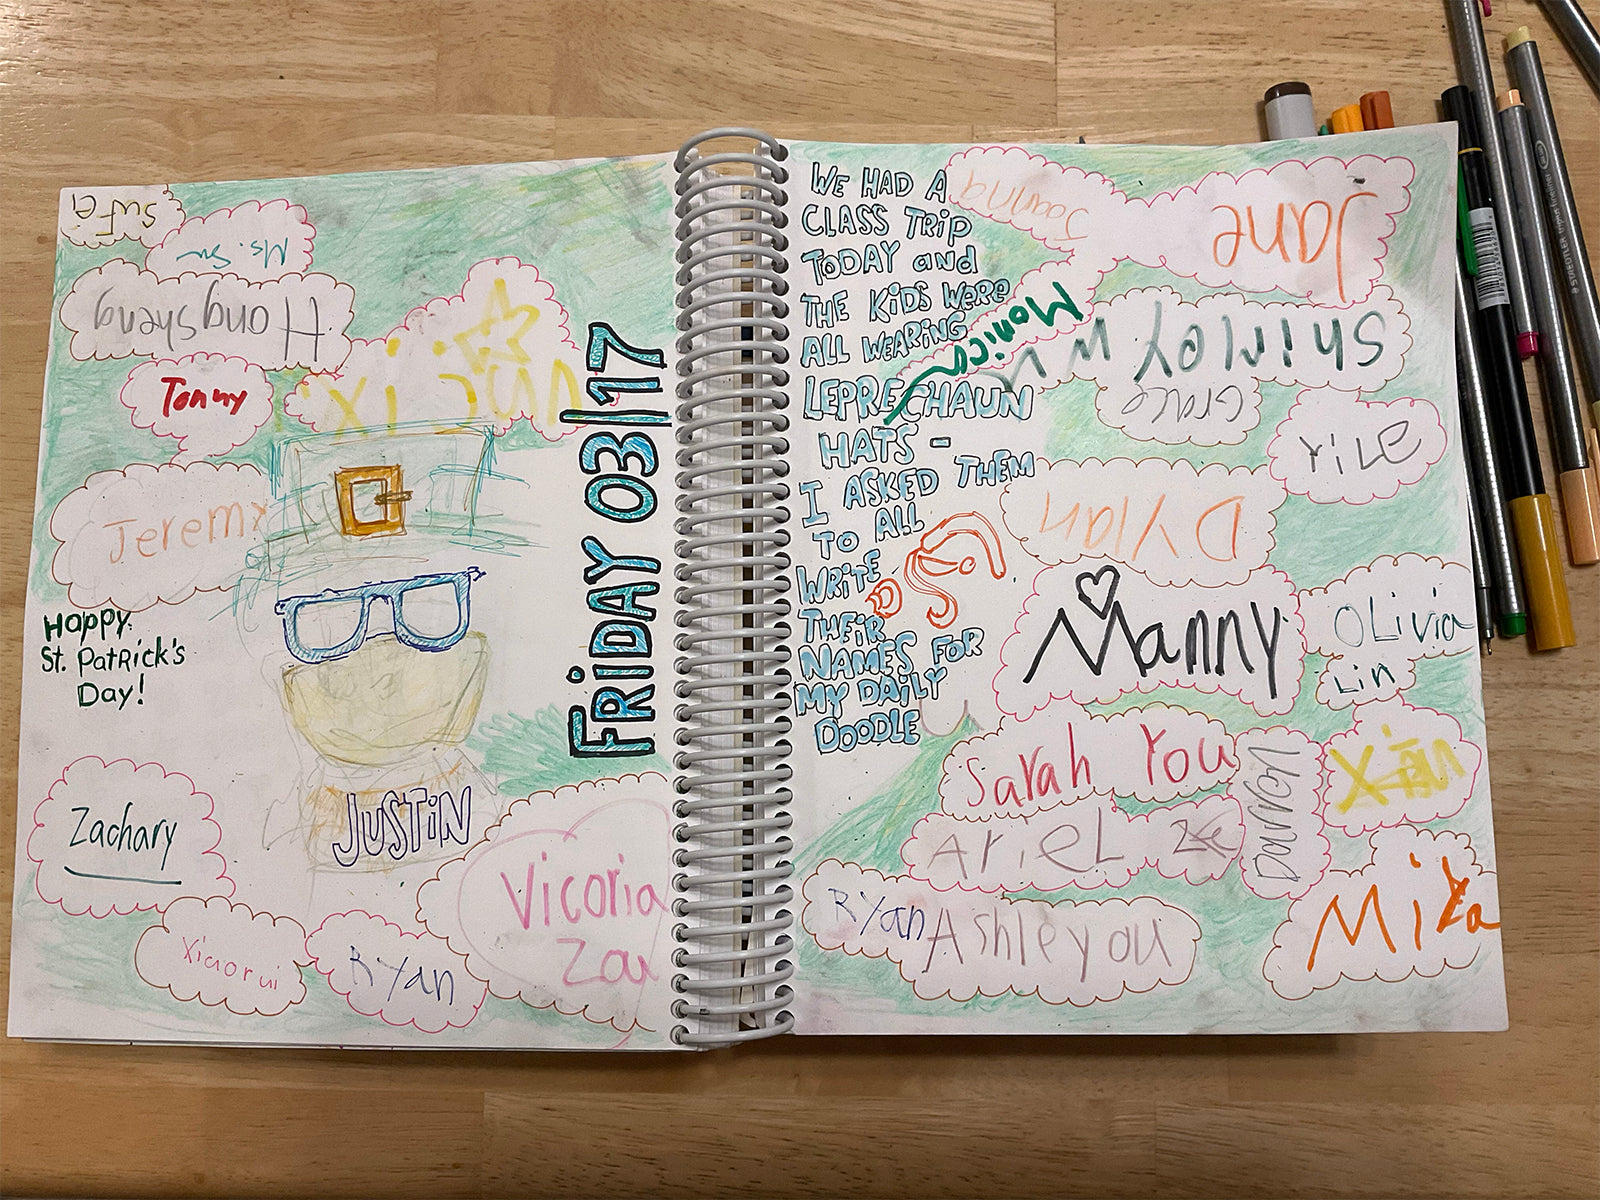 My Daily Doodle Book, daily doodling, daily journaling